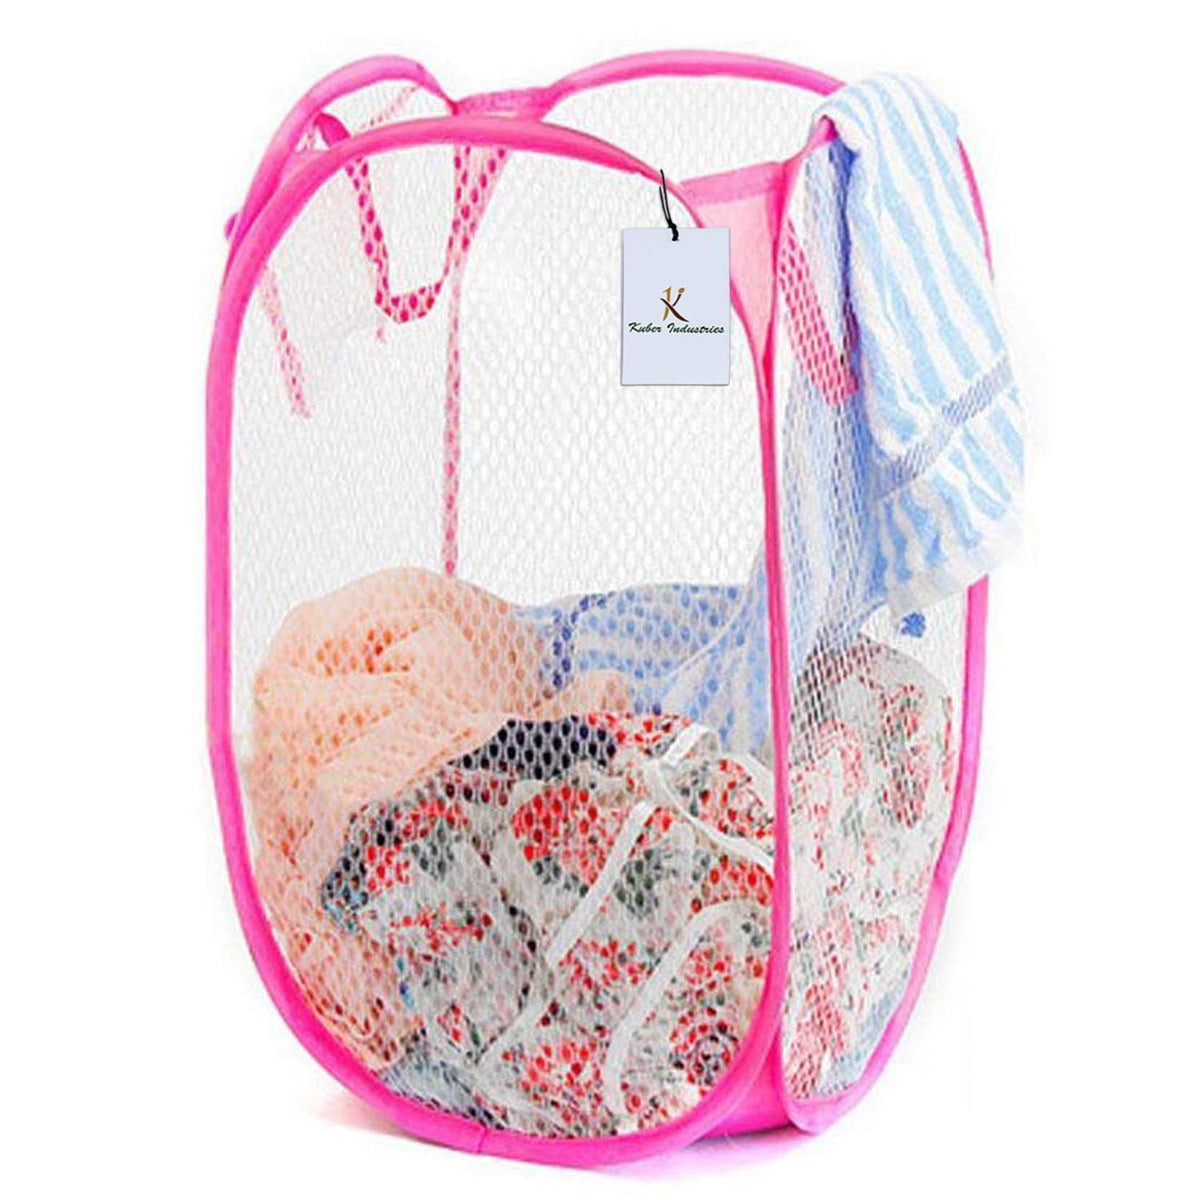 Kuber Industries Nylon Mesh Laundry Basket|Sturdy Material & Durable Handles|Netted Lightweight Laundry Bag, Size 36 x 36 x 58, Capicity 30 Ltr (Pink)